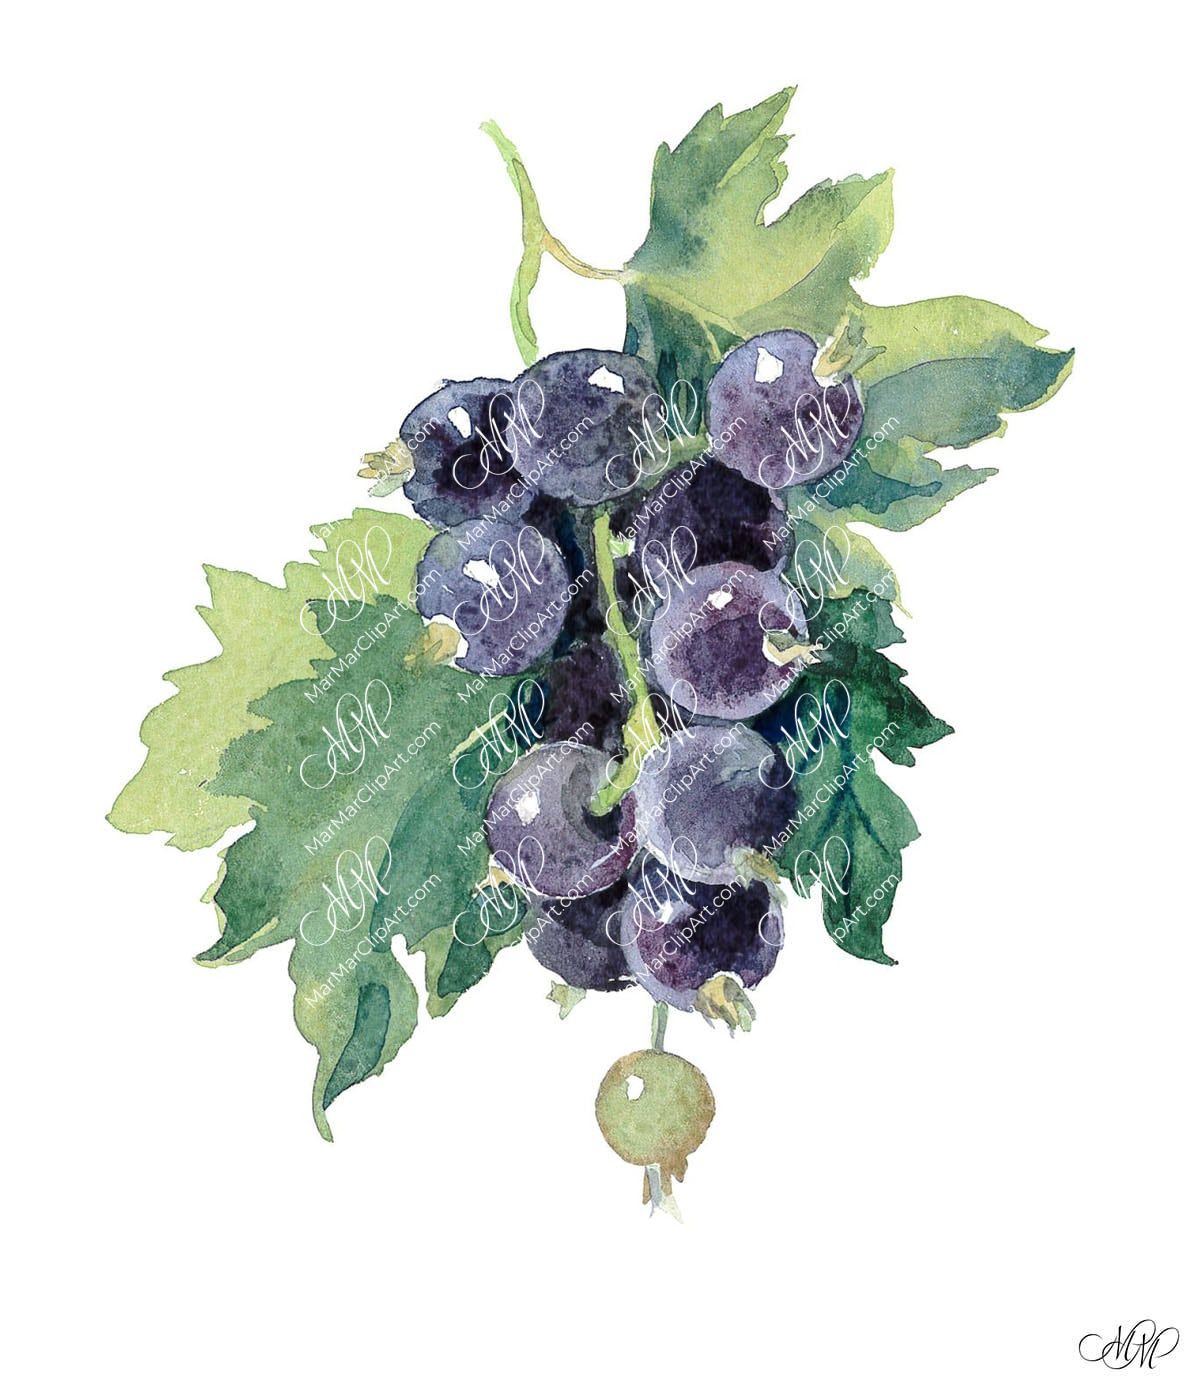 Black ribes. Isolated on white background with work path. Watercolor. 38x43 cm. ribes2.jpg 7Mb. RGB. 300 px. Instant download.